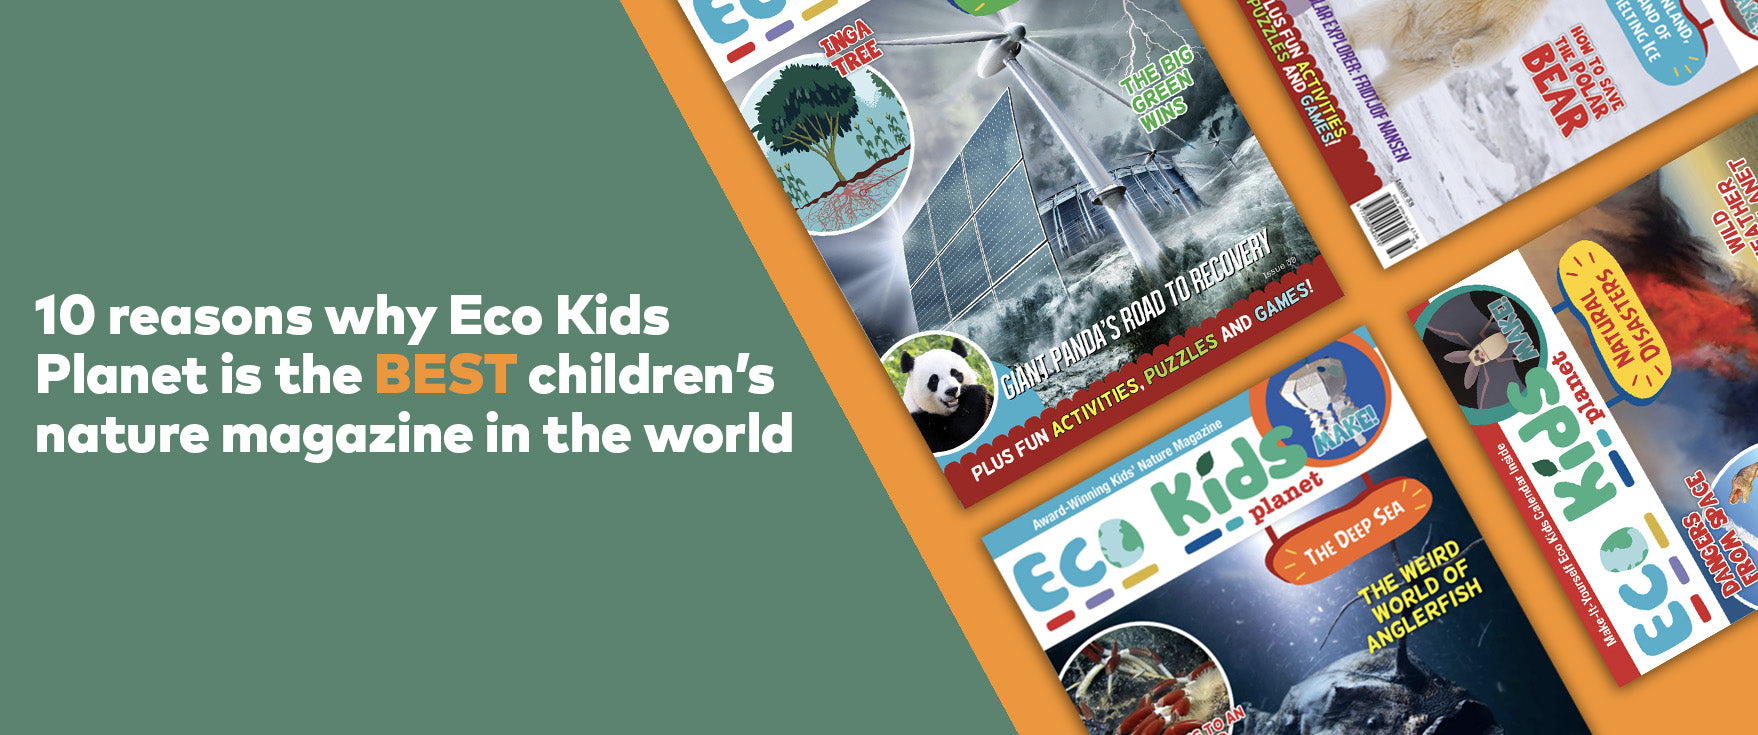 10 Reasons Why Eco Kids Planet is THE Best Children's Nature Magazine in the World